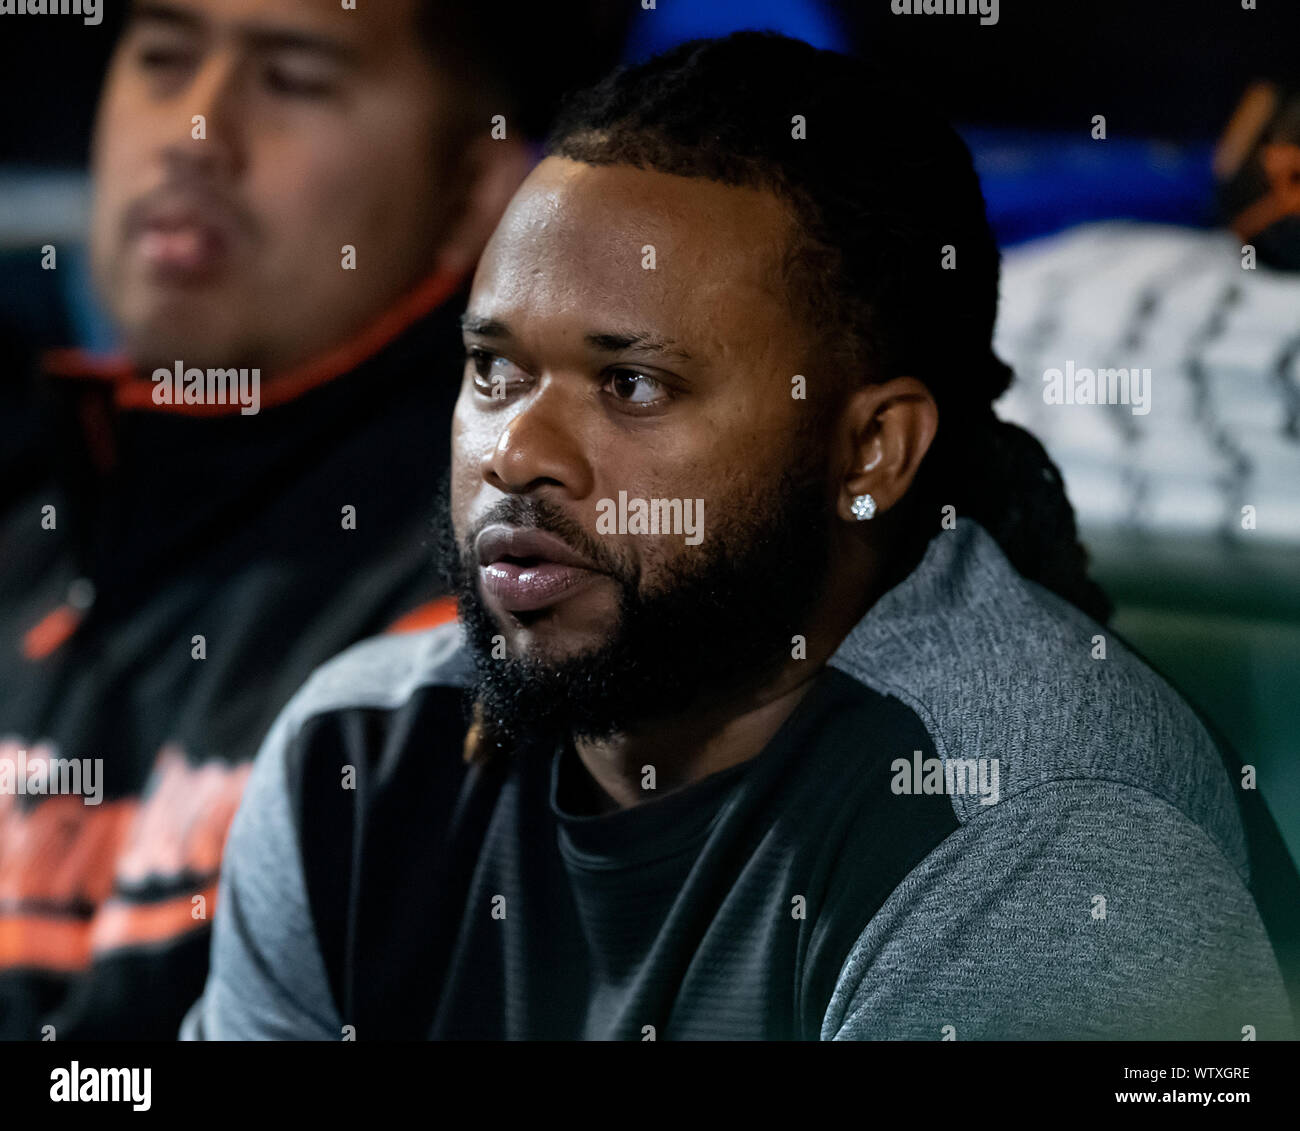 San Francisco, California, USA. 11th Sep, 2019. San Francisco Giants starting pitcher Johnny Cueto (47) hangs out in the dugout after his first game back last night after having Tommy John surgery, during a MLB game between the Pittsburgh Pirates and the San Francisco Giants at Oracle Park in San Francisco, California. Valerie Shoaps/CSM/Alamy Live News Stock Photo